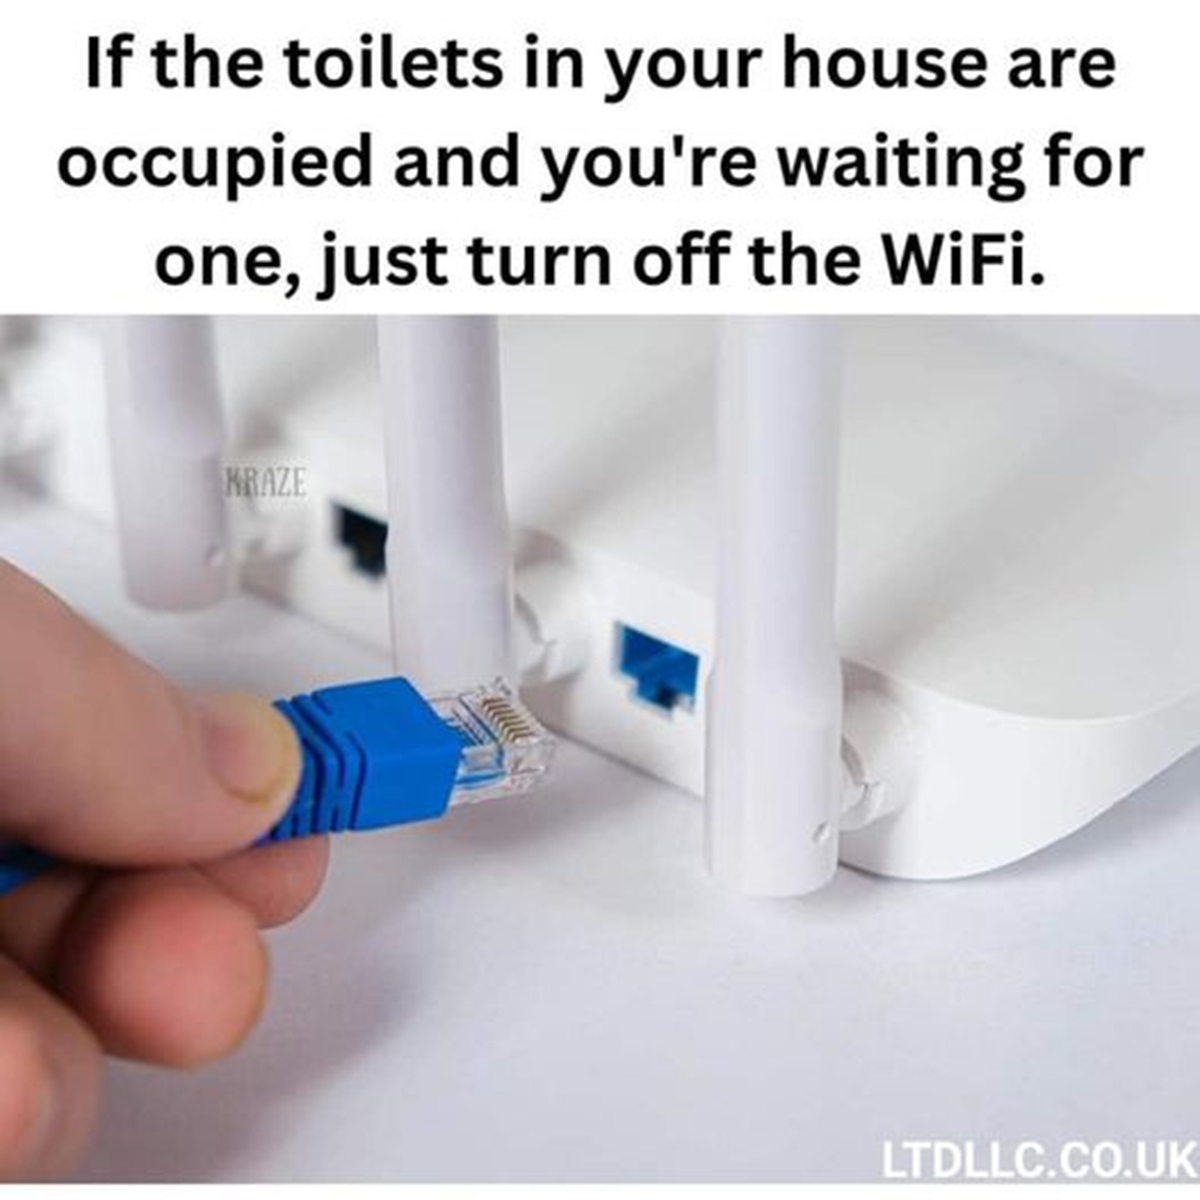 photo caption - If the toilets in your house are occupied and you're waiting for one, just turn off the WiFi. Kraze Ltdllc.Co.Uk